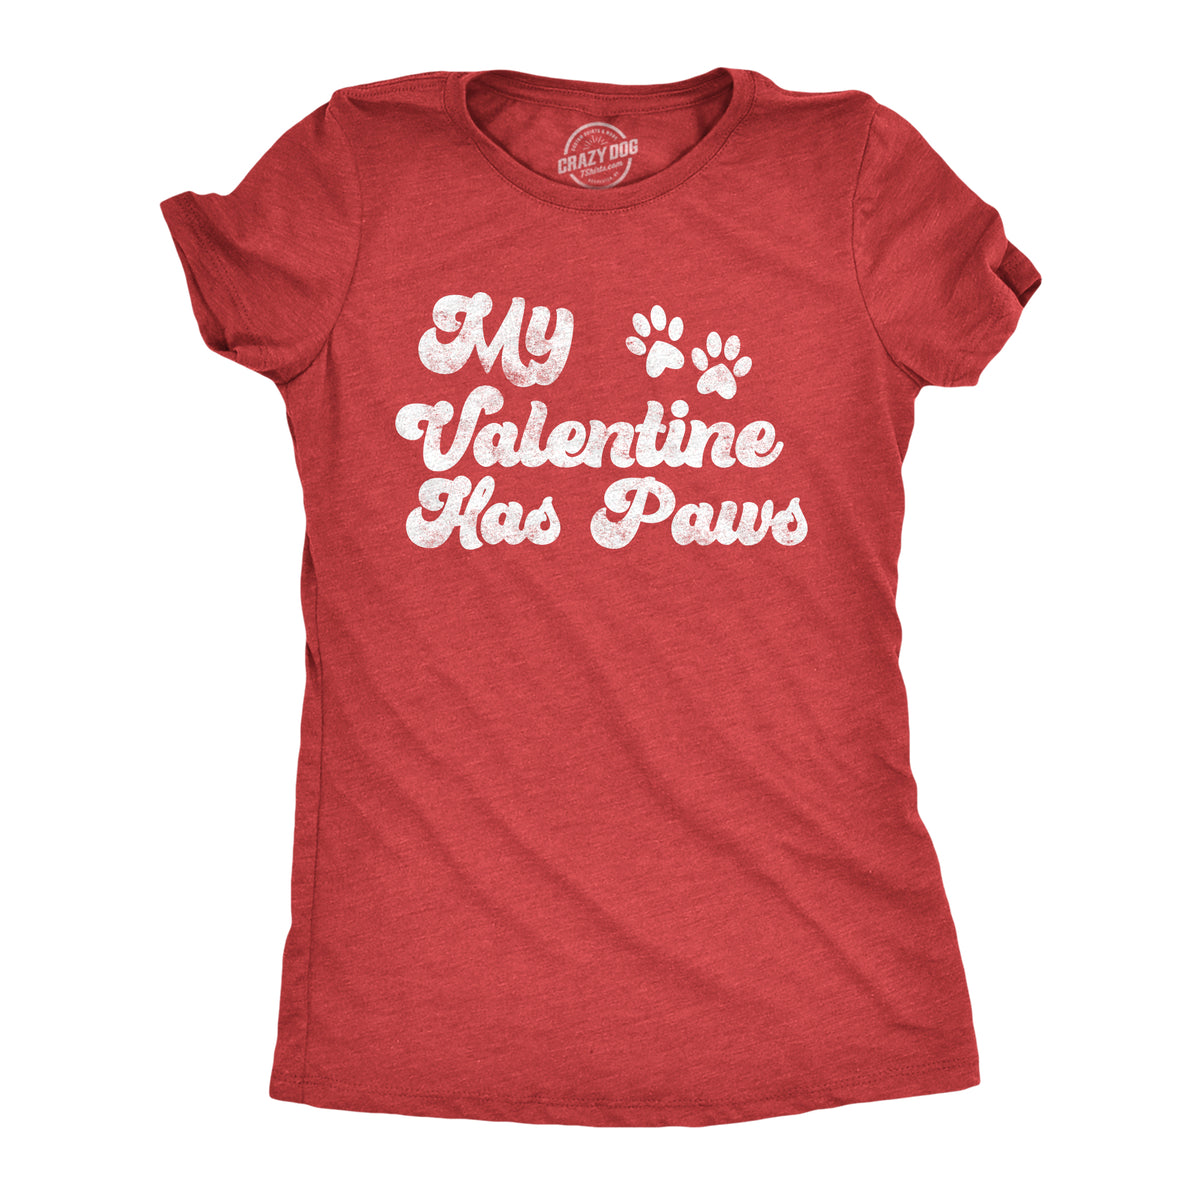 Funny Heather Red - PAWS My Favorite Valentine Has Paws Womens T Shirt Nerdy Valentine&#39;s Day Food Tee